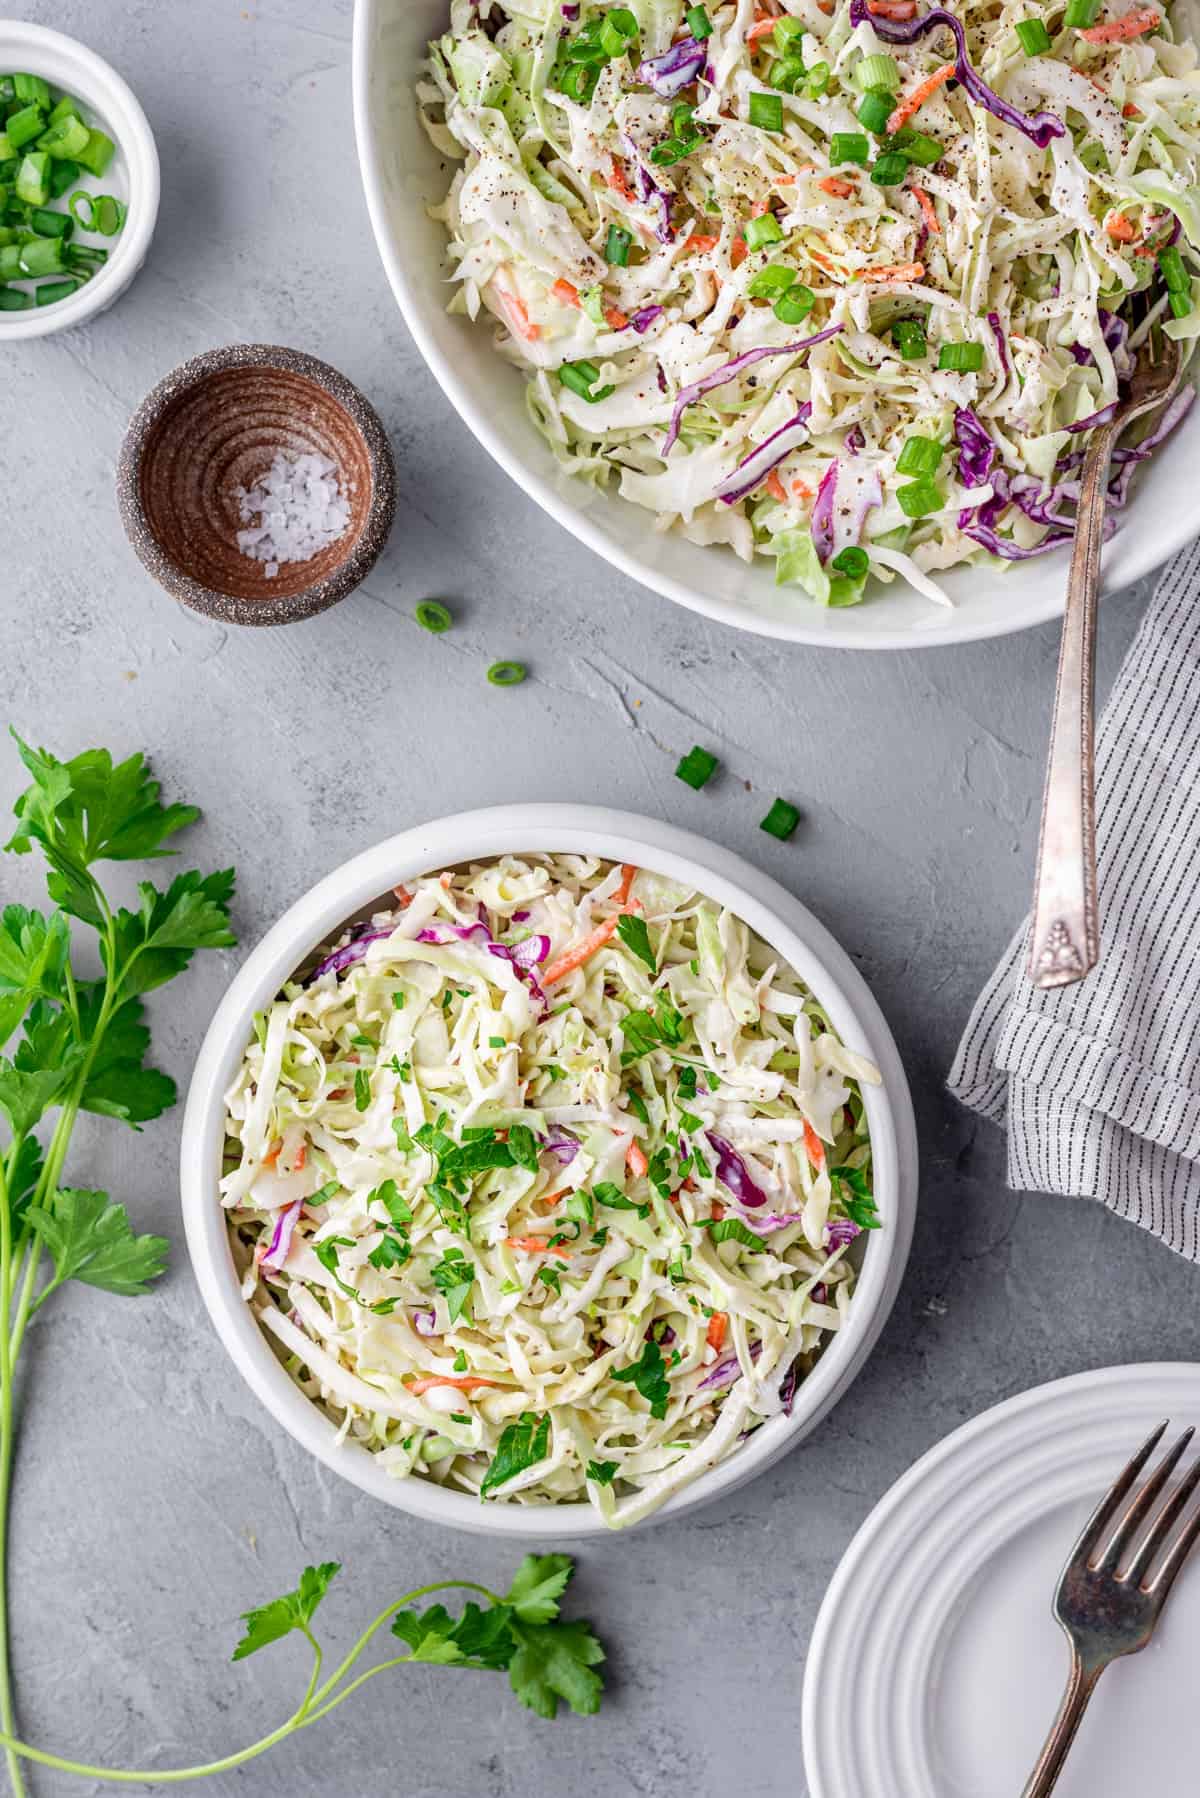 Easy Low-Carb Keto Coleslaw